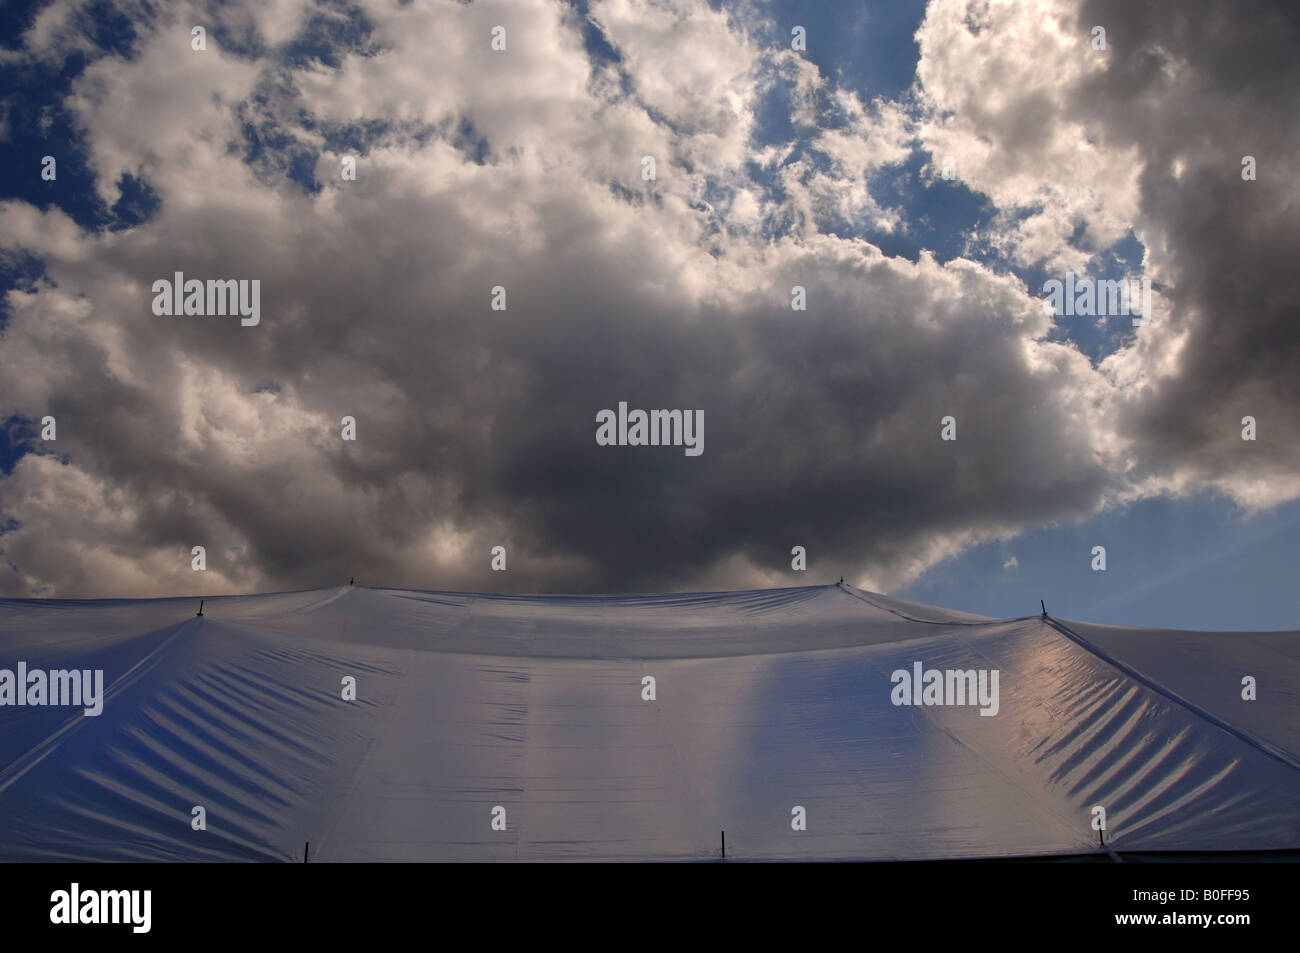 large tent with large clouds Stock Photo